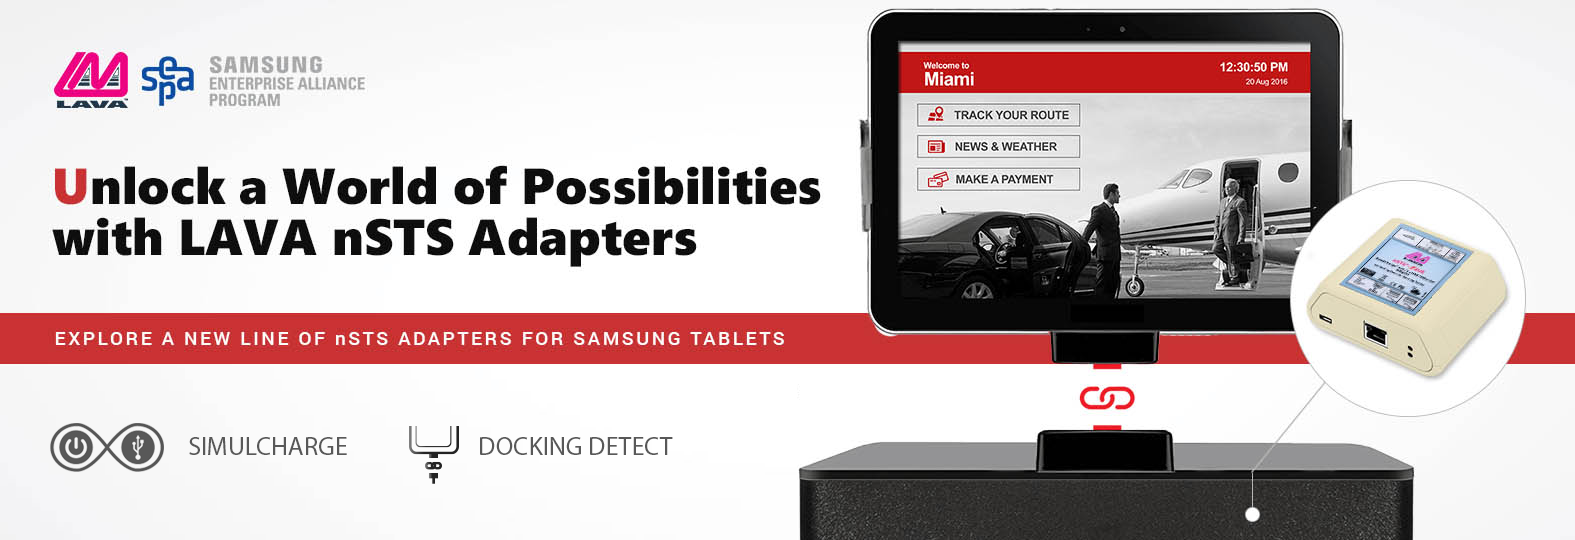 Tablet kiosk with nSTS Samsung tablet adapter